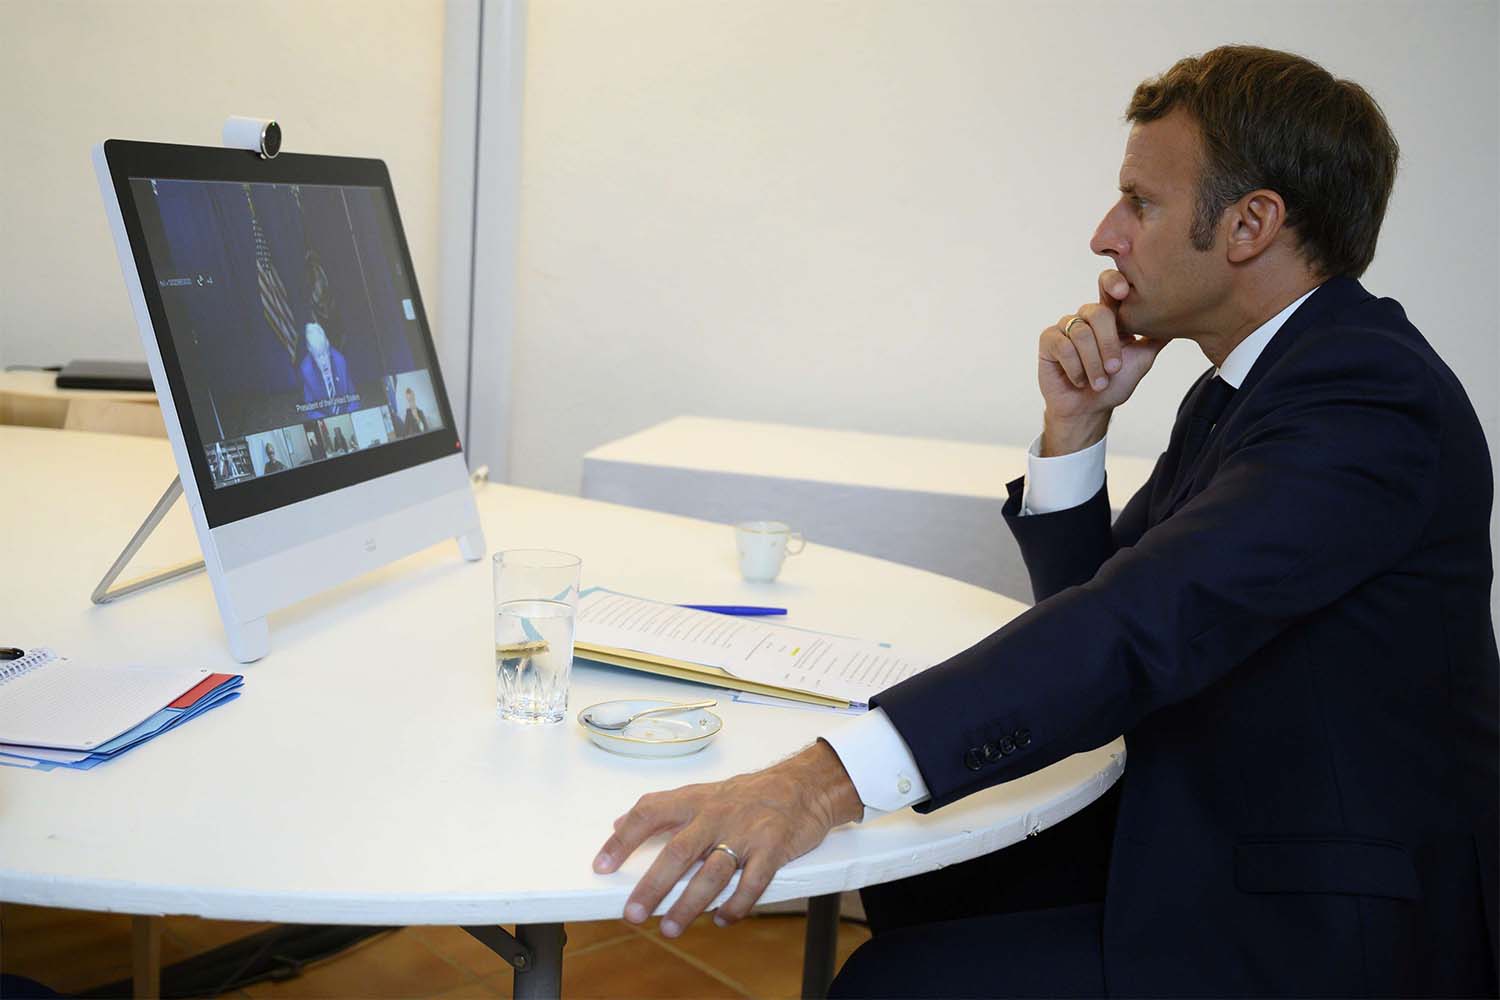 Sunday’s donor teleconference was hosted by French President Emmanuel Macron